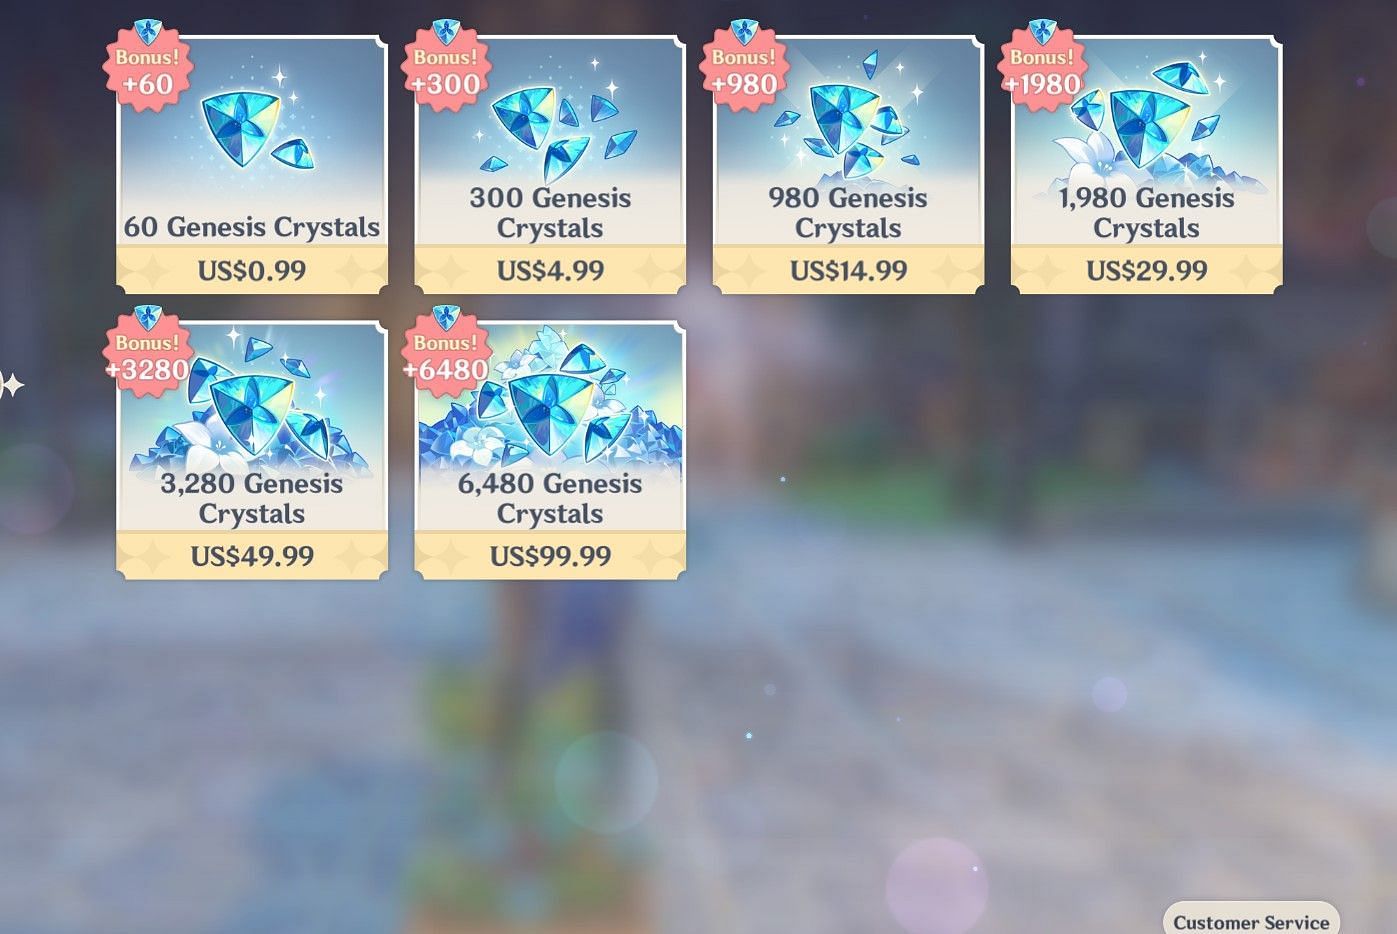 What the Genesis Crystals are priced at in the USA (Image via Genshin Impact)